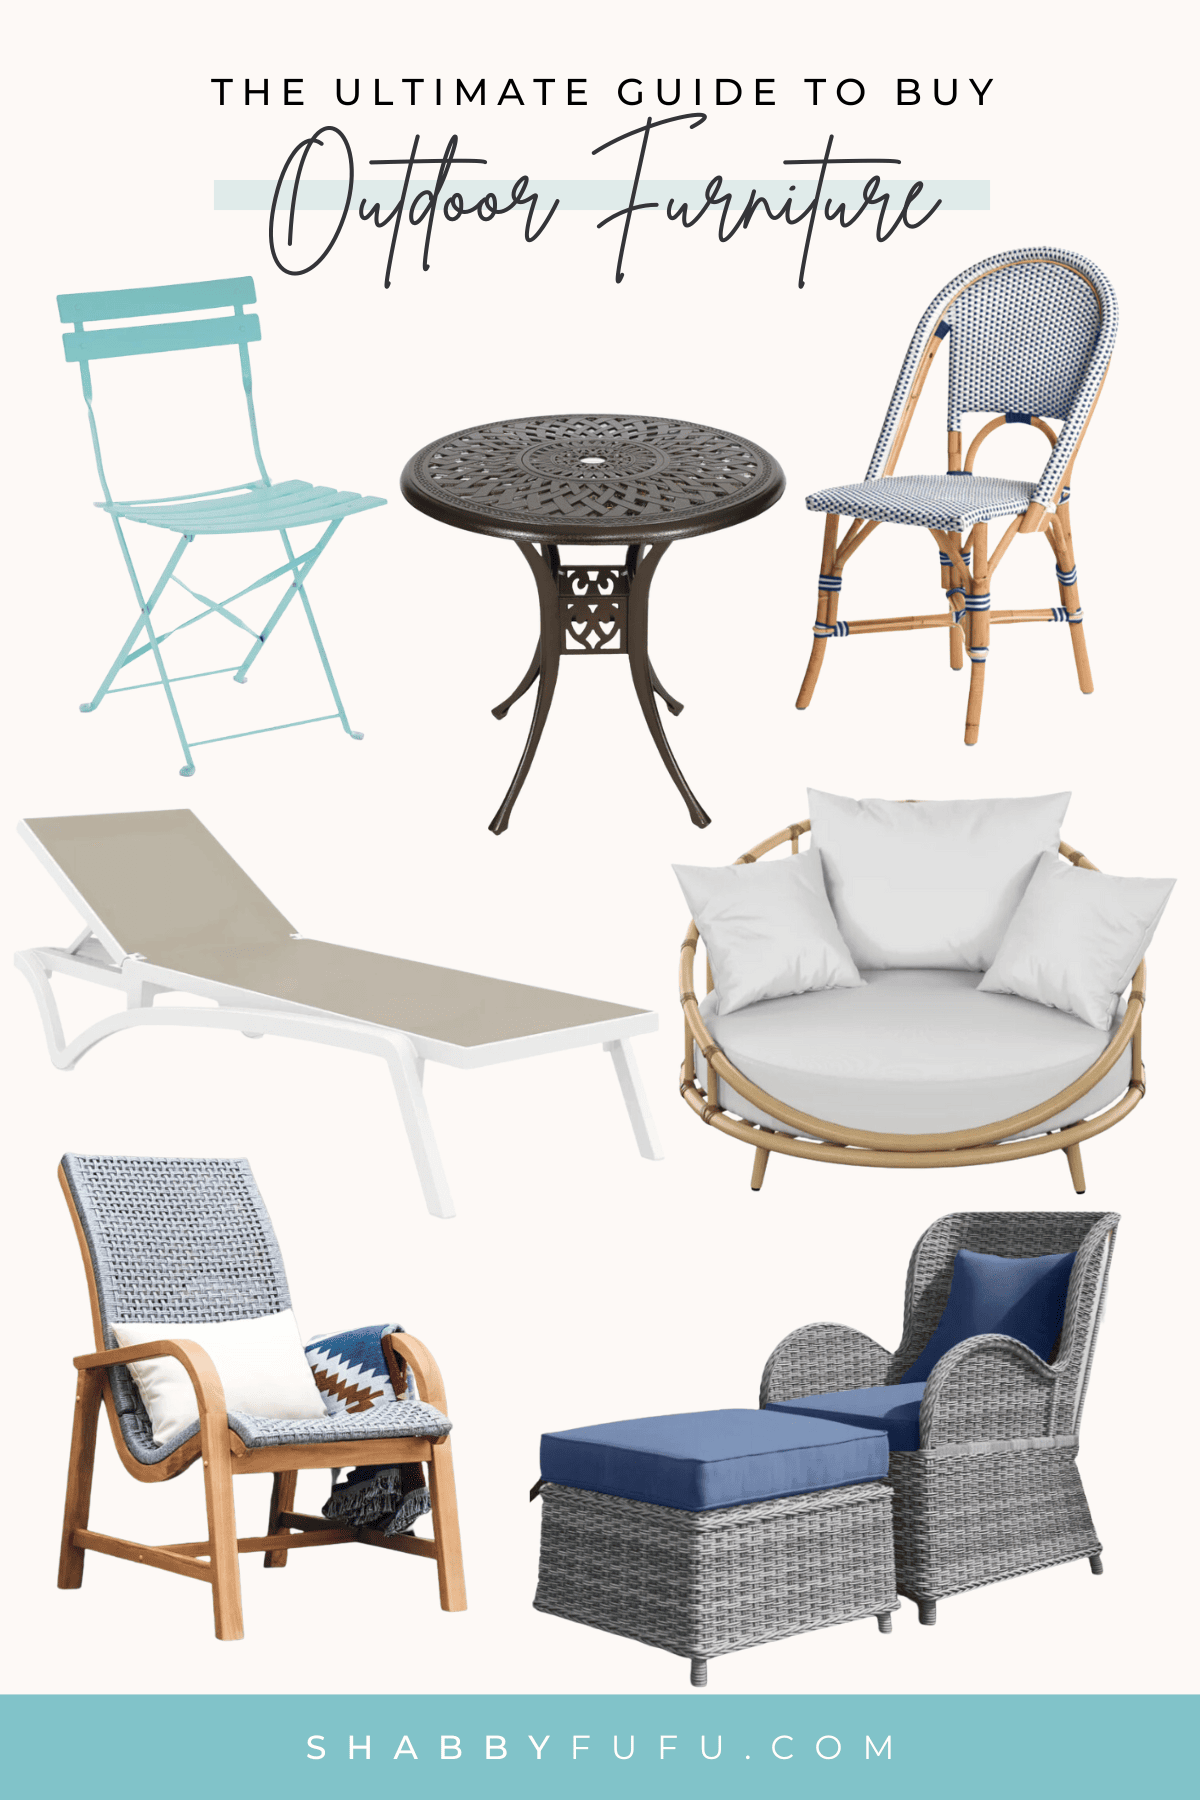 https://shabbyfufu.com/wp-content/uploads/2019/02/buying-outdoor-furniture-2.png